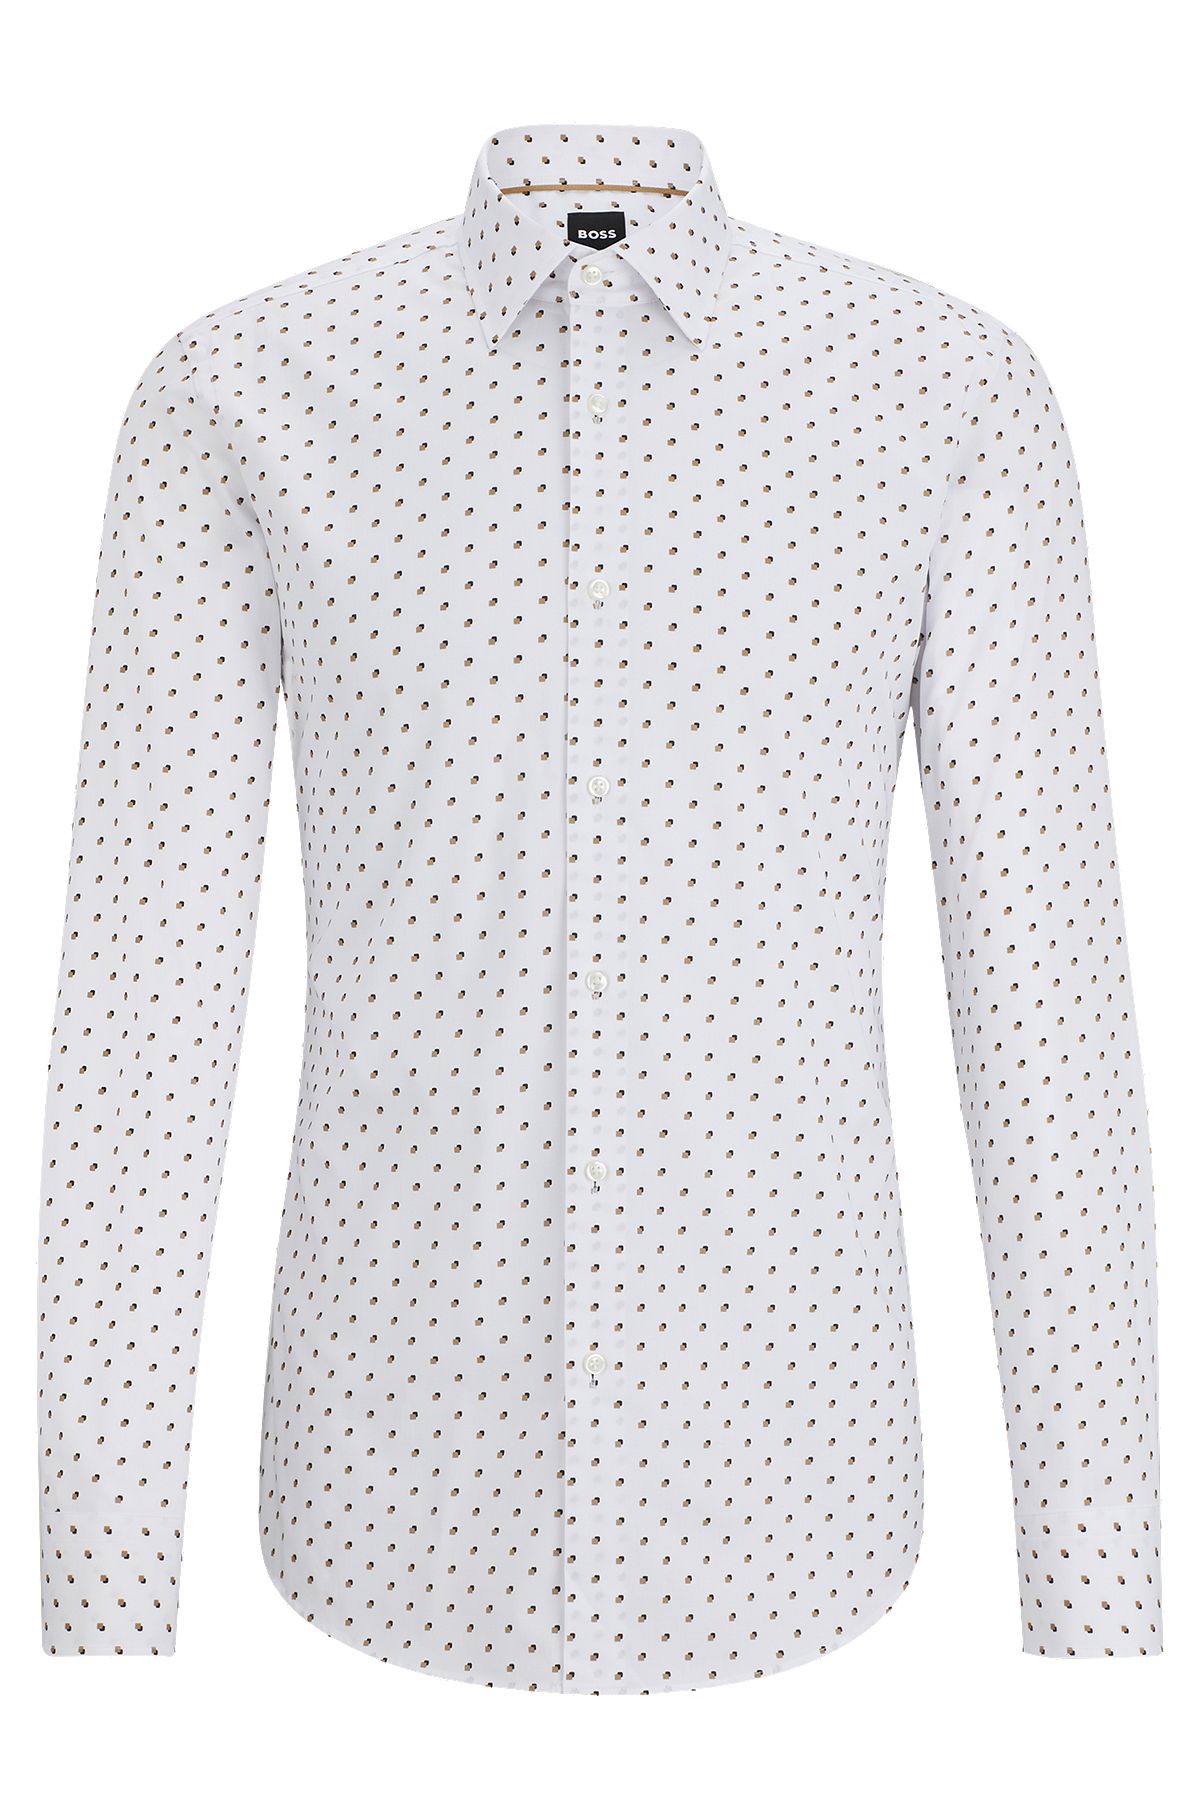 Slim-fit shirt in printed stretch cotton, White